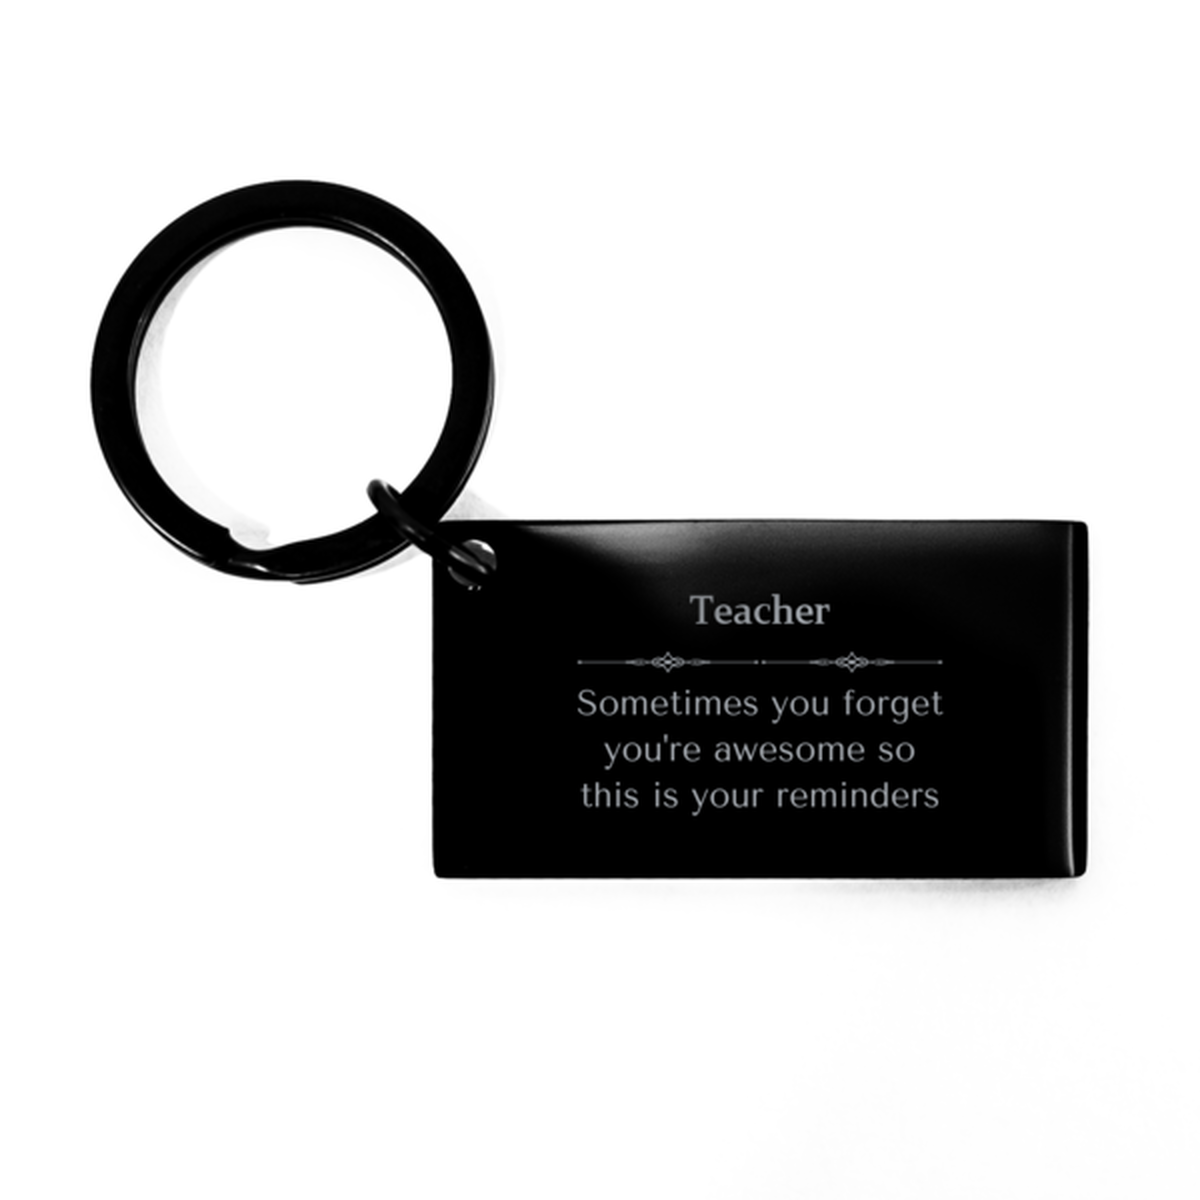 Sentimental Teacher Keychain, Word Processor Sometimes you forget you're awesome so this is your reminders, Graduation Christmas Birthday Gifts for Teacher, Men, Women, Coworkers